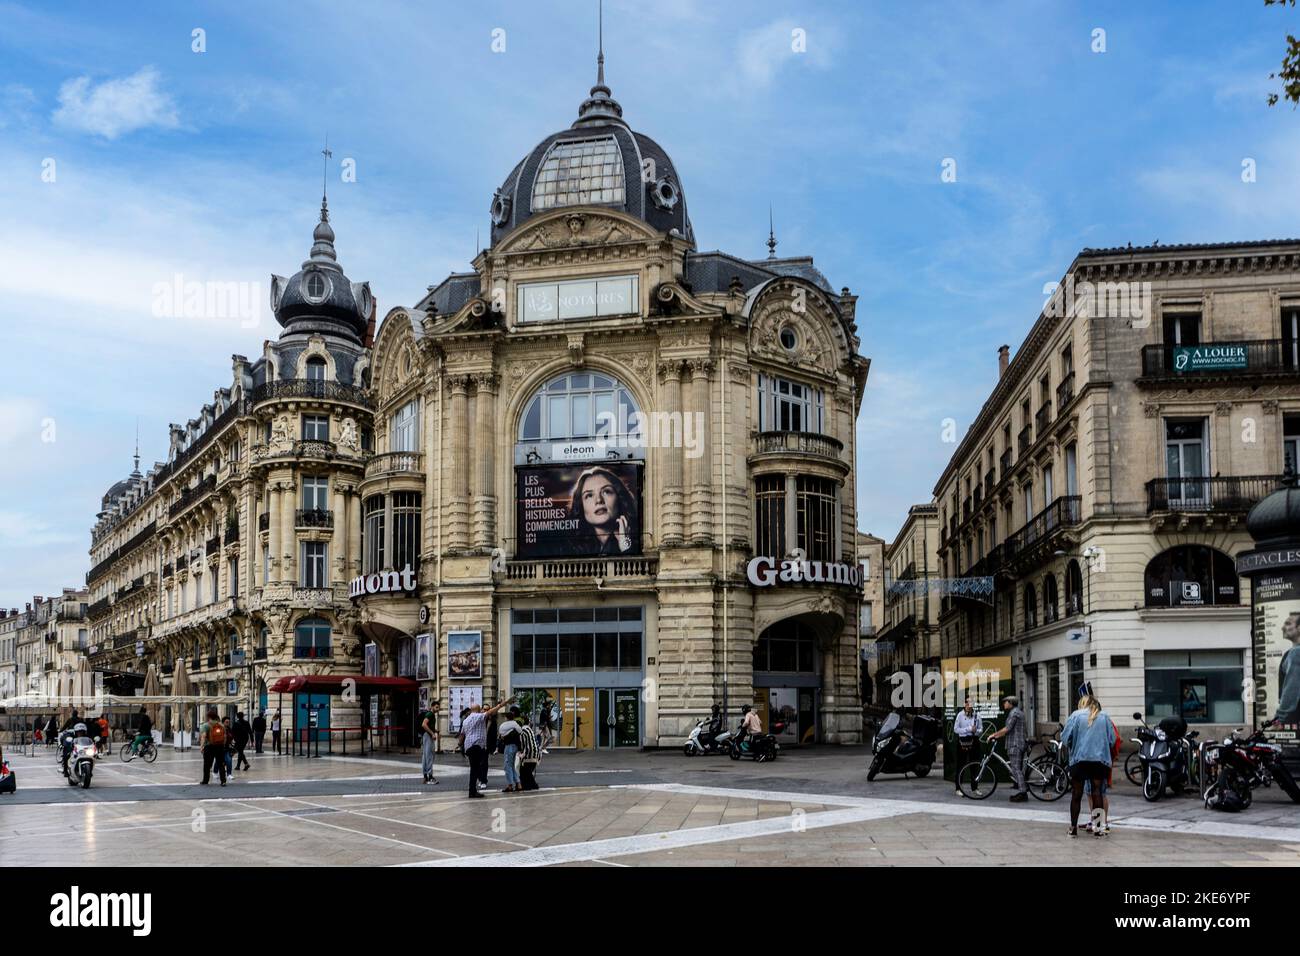 The city centre of Montpellier, France. Stock Photo